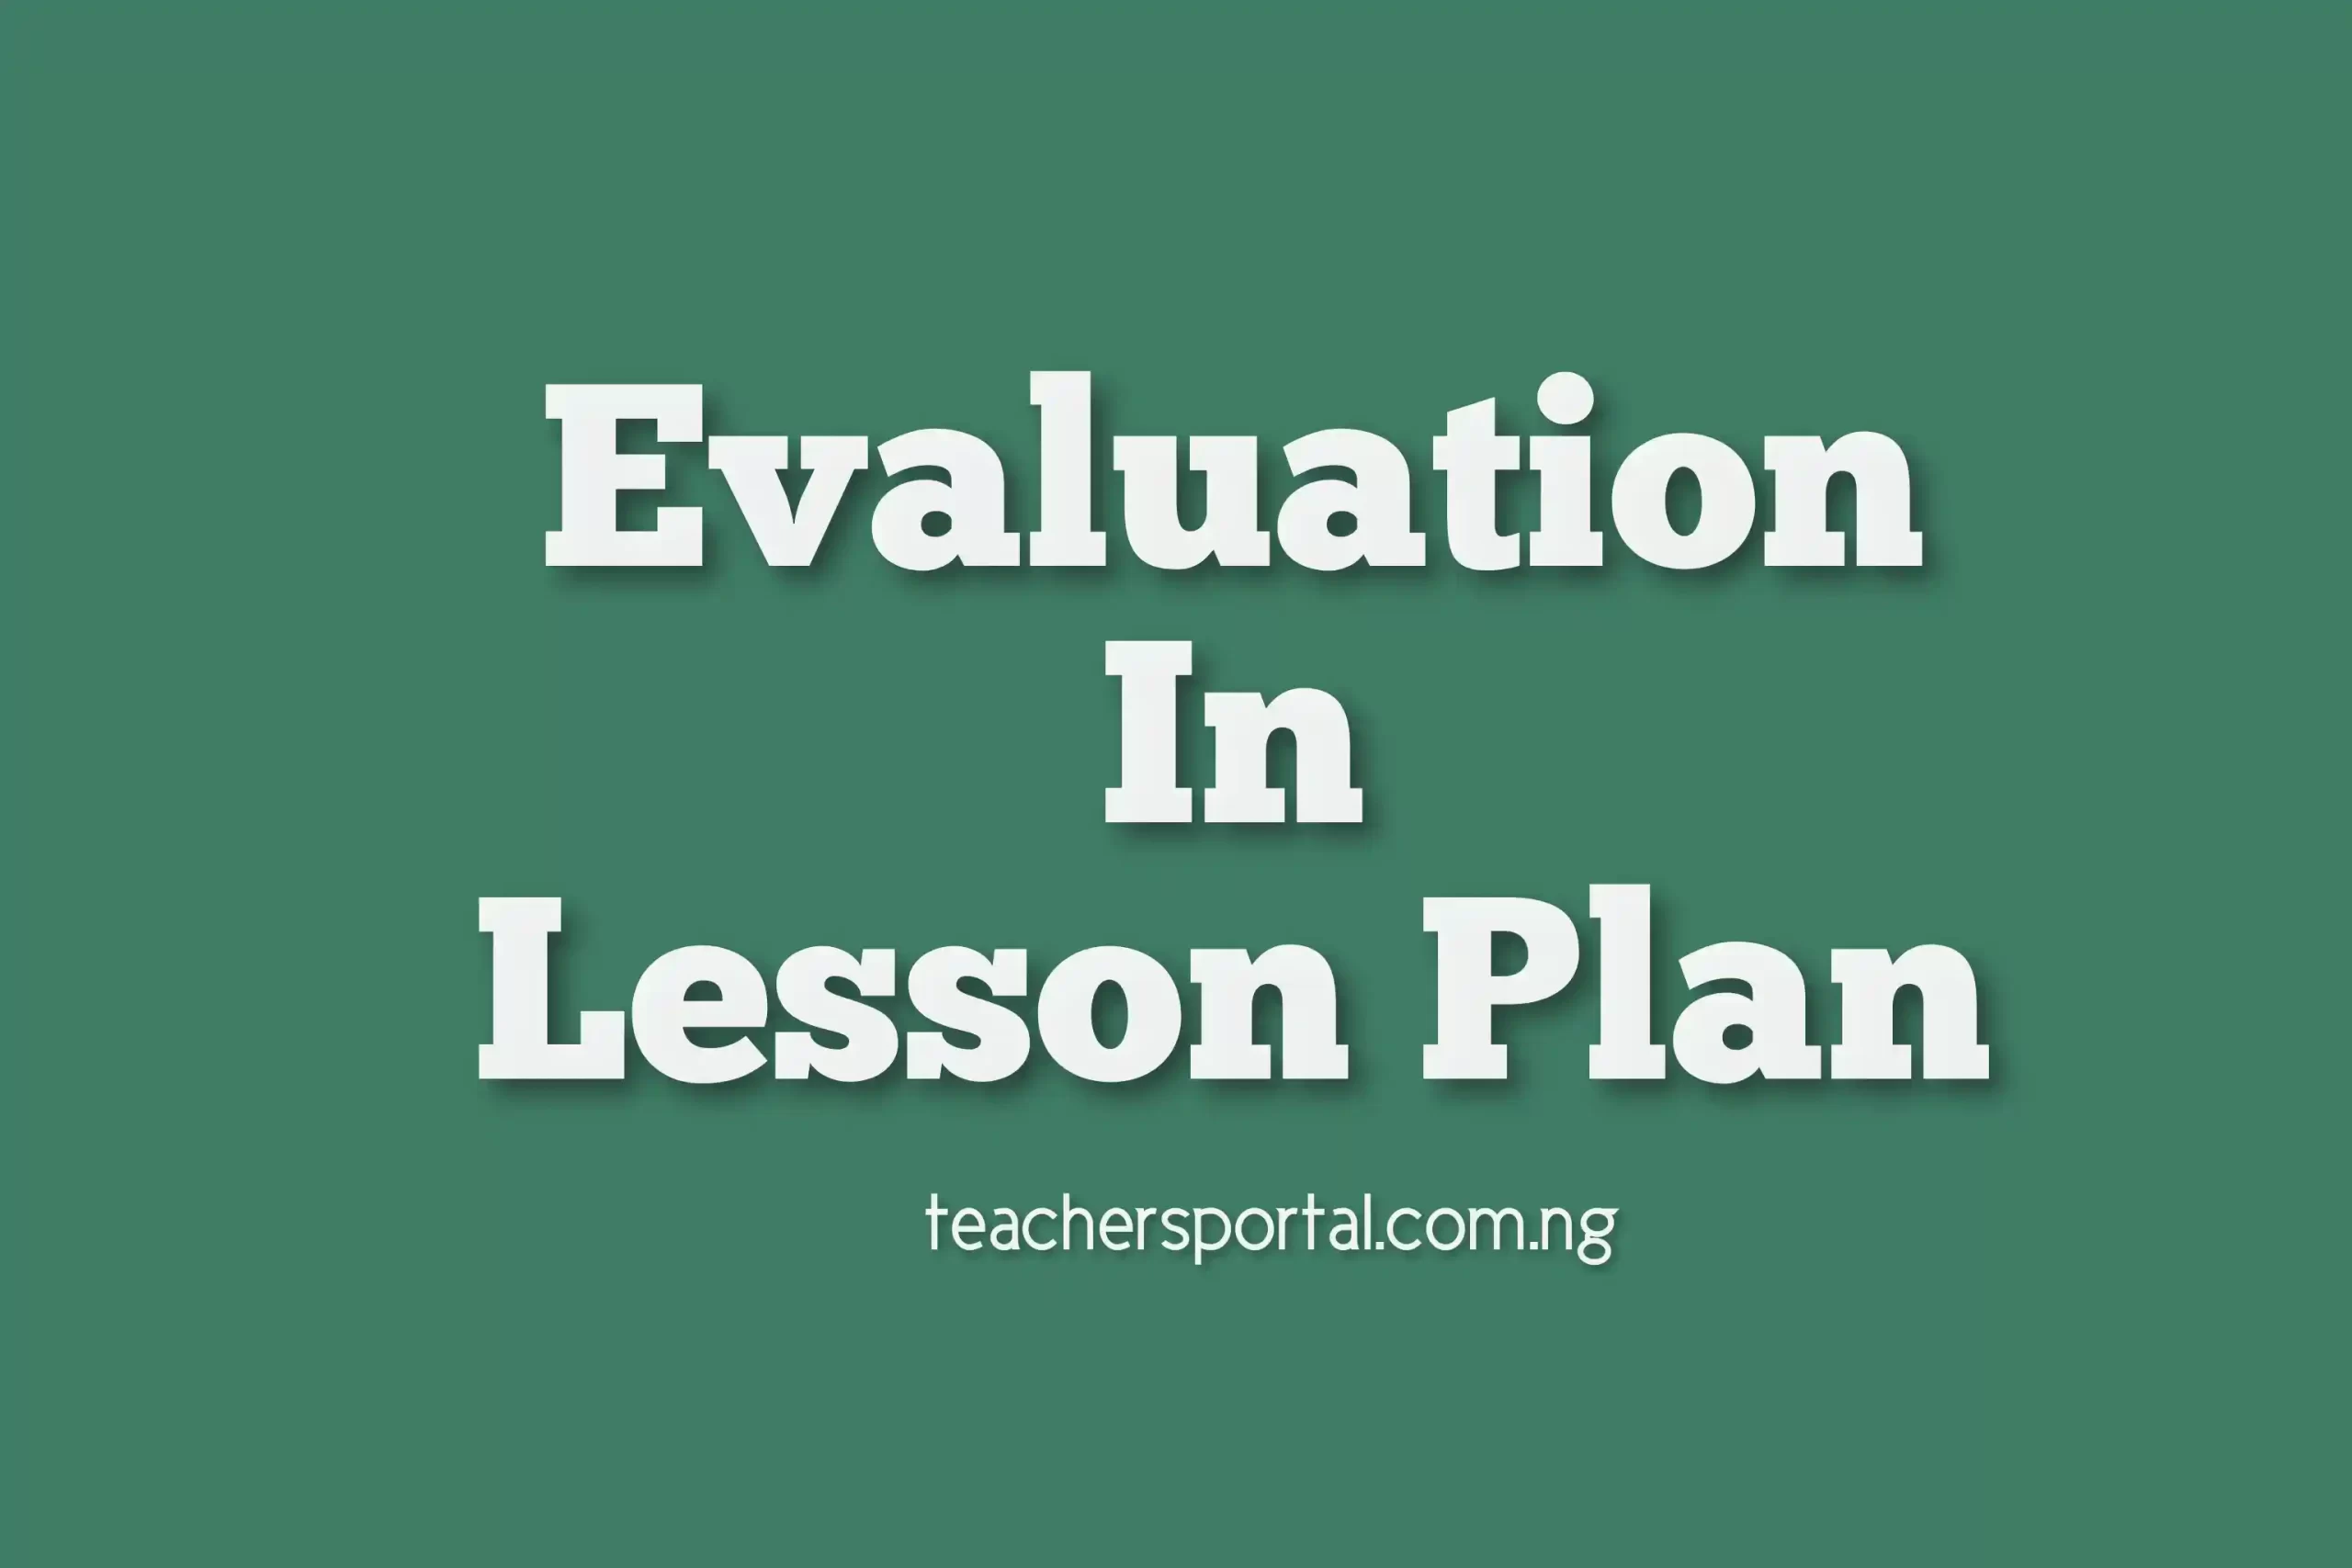 evaluation of video lesson assignment